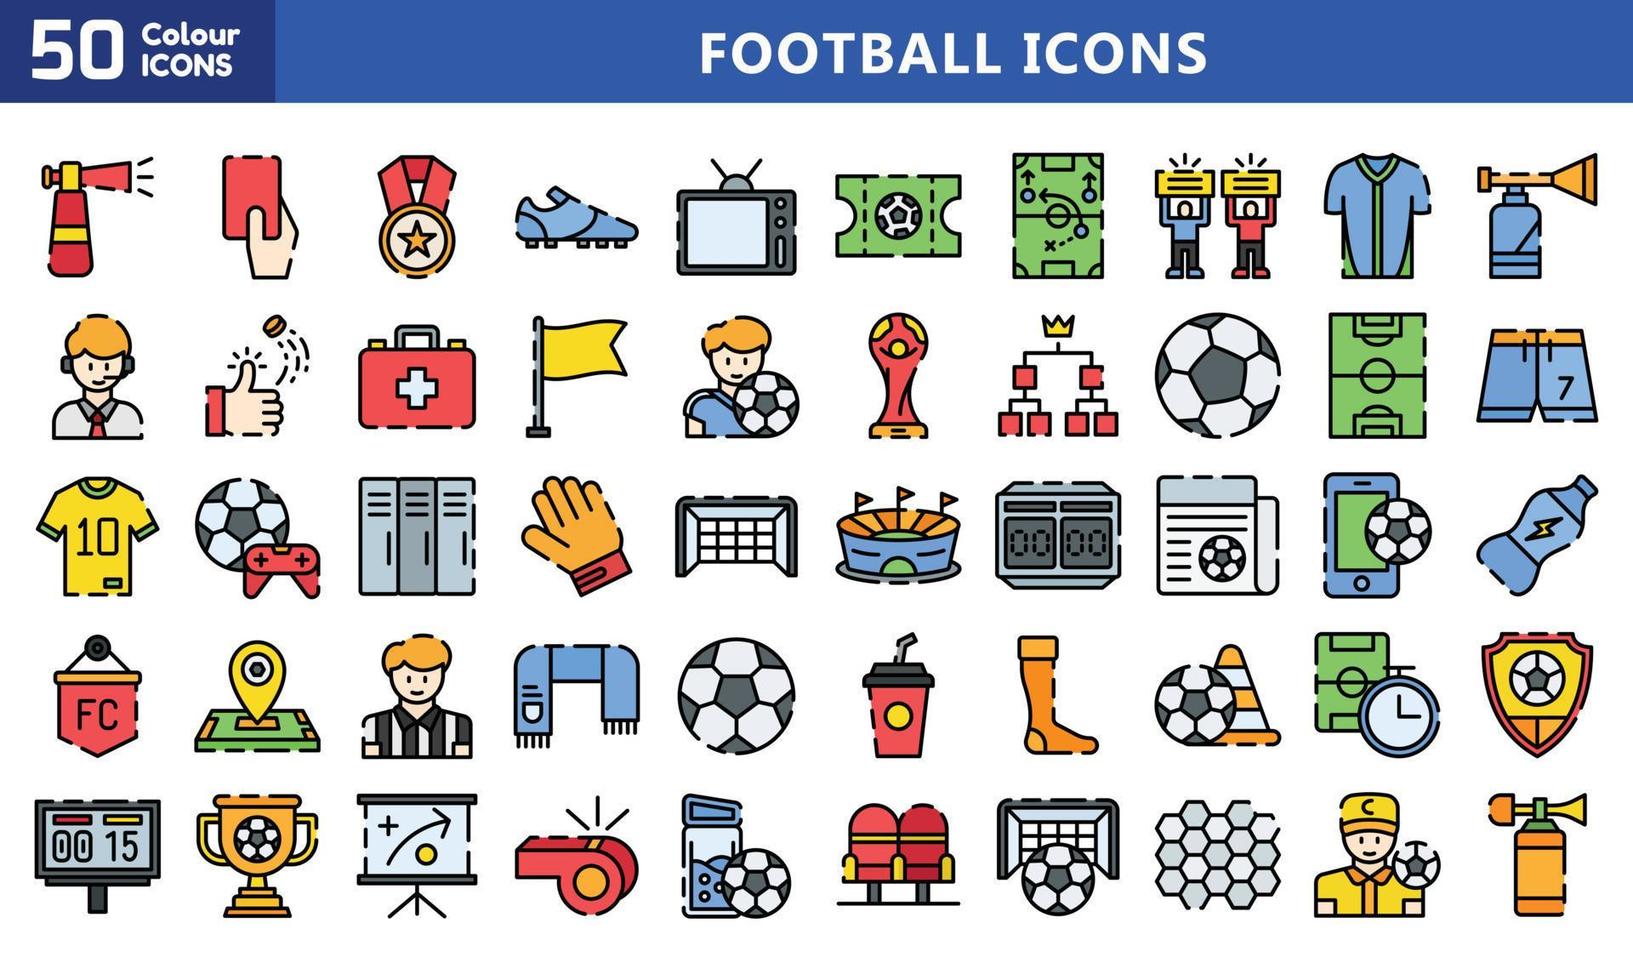 Icons for  mobile and web. High quality pictograms. Linear icons set of business, medical, UI and UX, media, money, travel, etc. vector